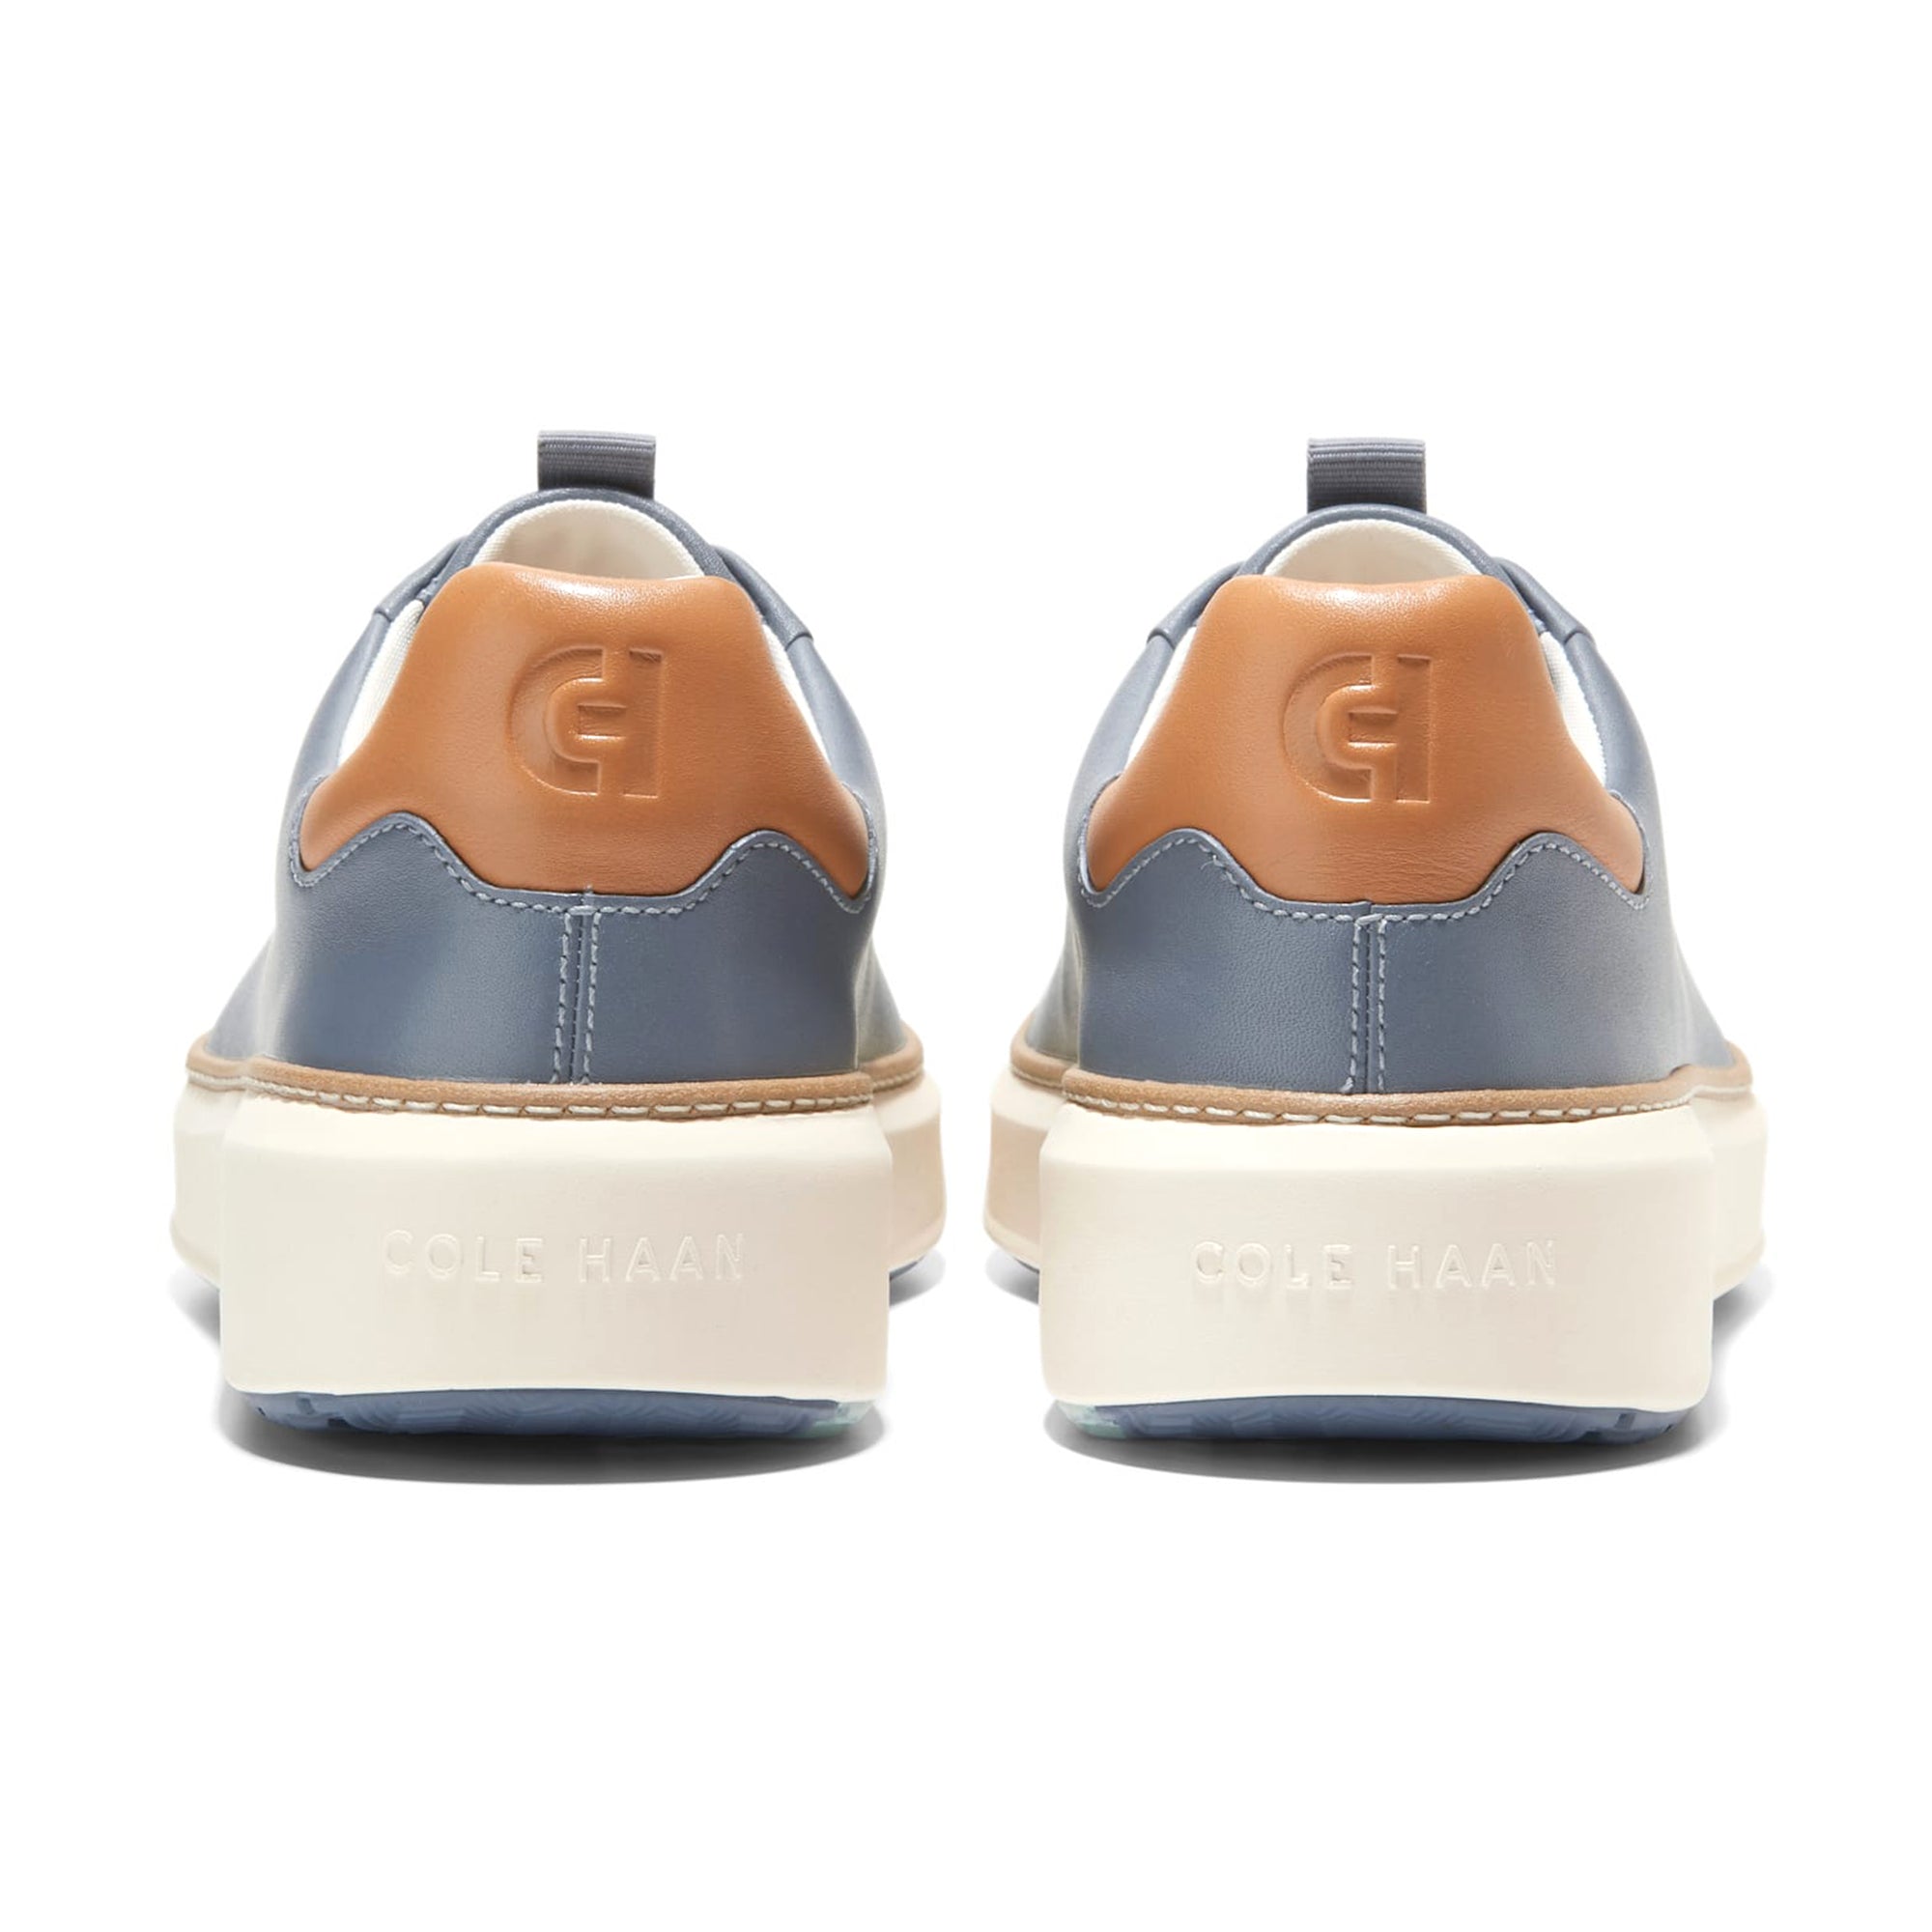 cole-haan-grandpro-topspin-golf-shoes-c38978-folkstone-grey-natural-tan-ivory